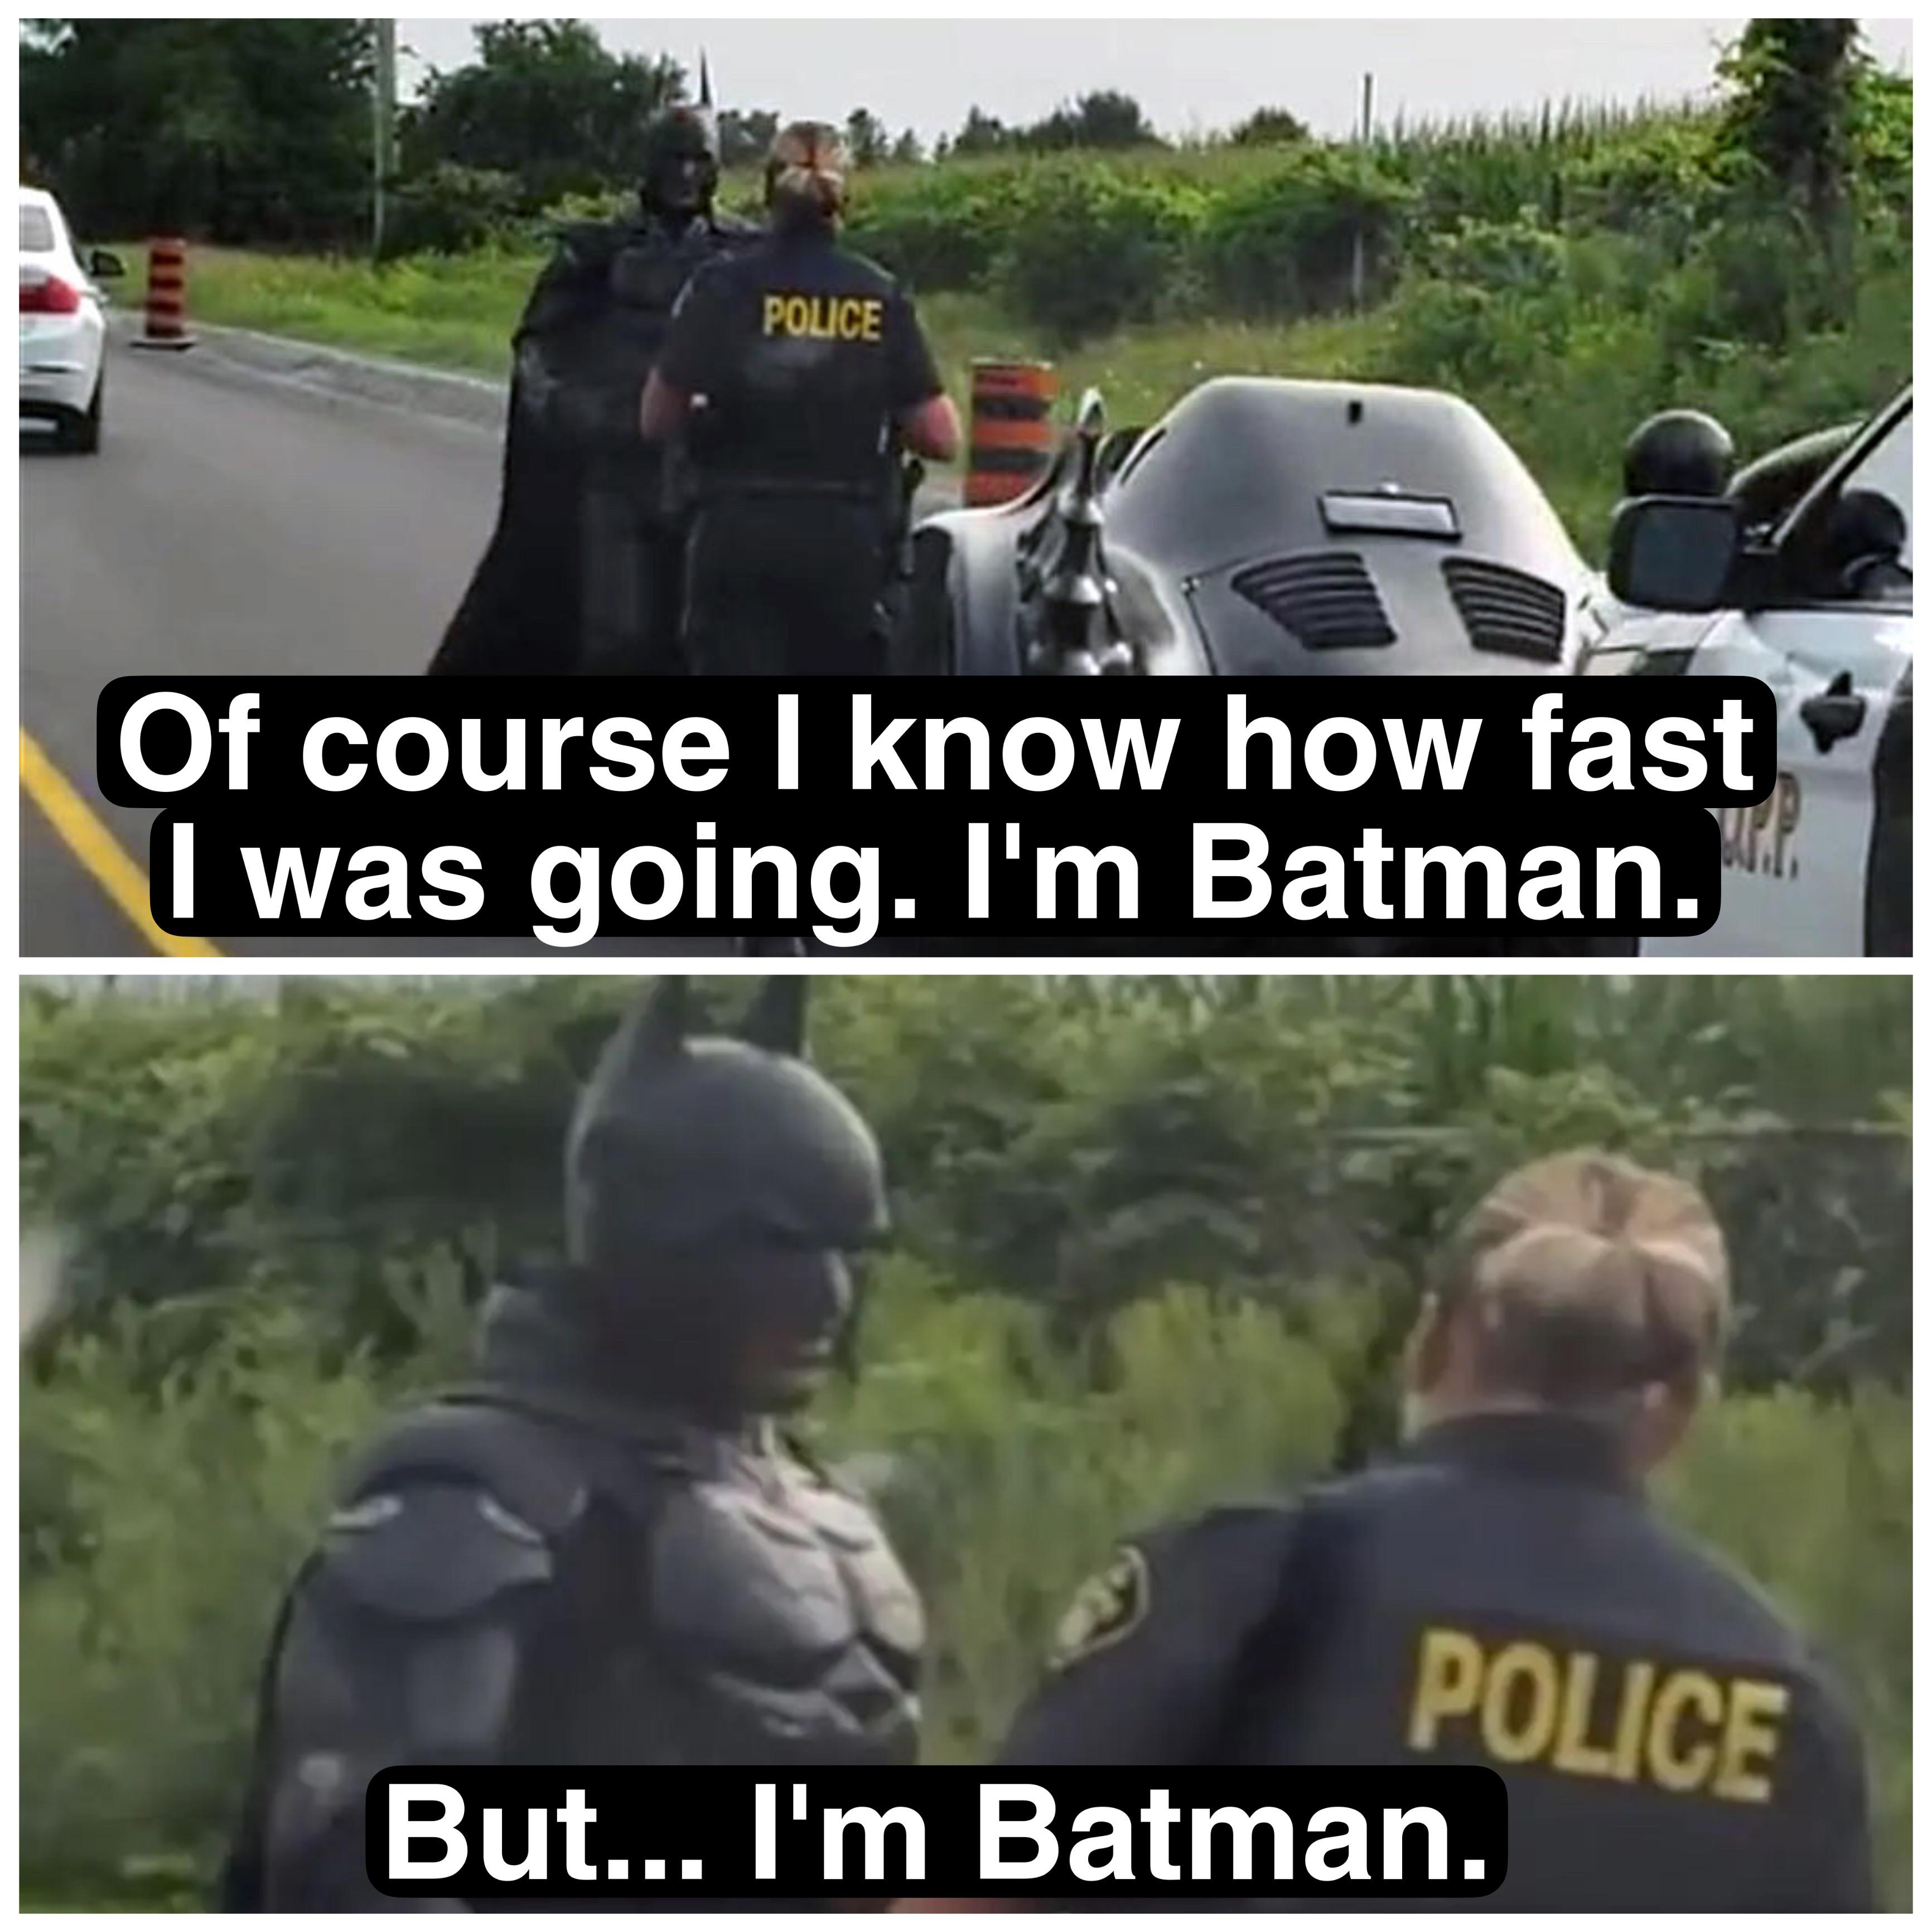 parking signs to print - Liit Police Of course I know how fast I was going. I'm Batman. Police But... I'm Batman.